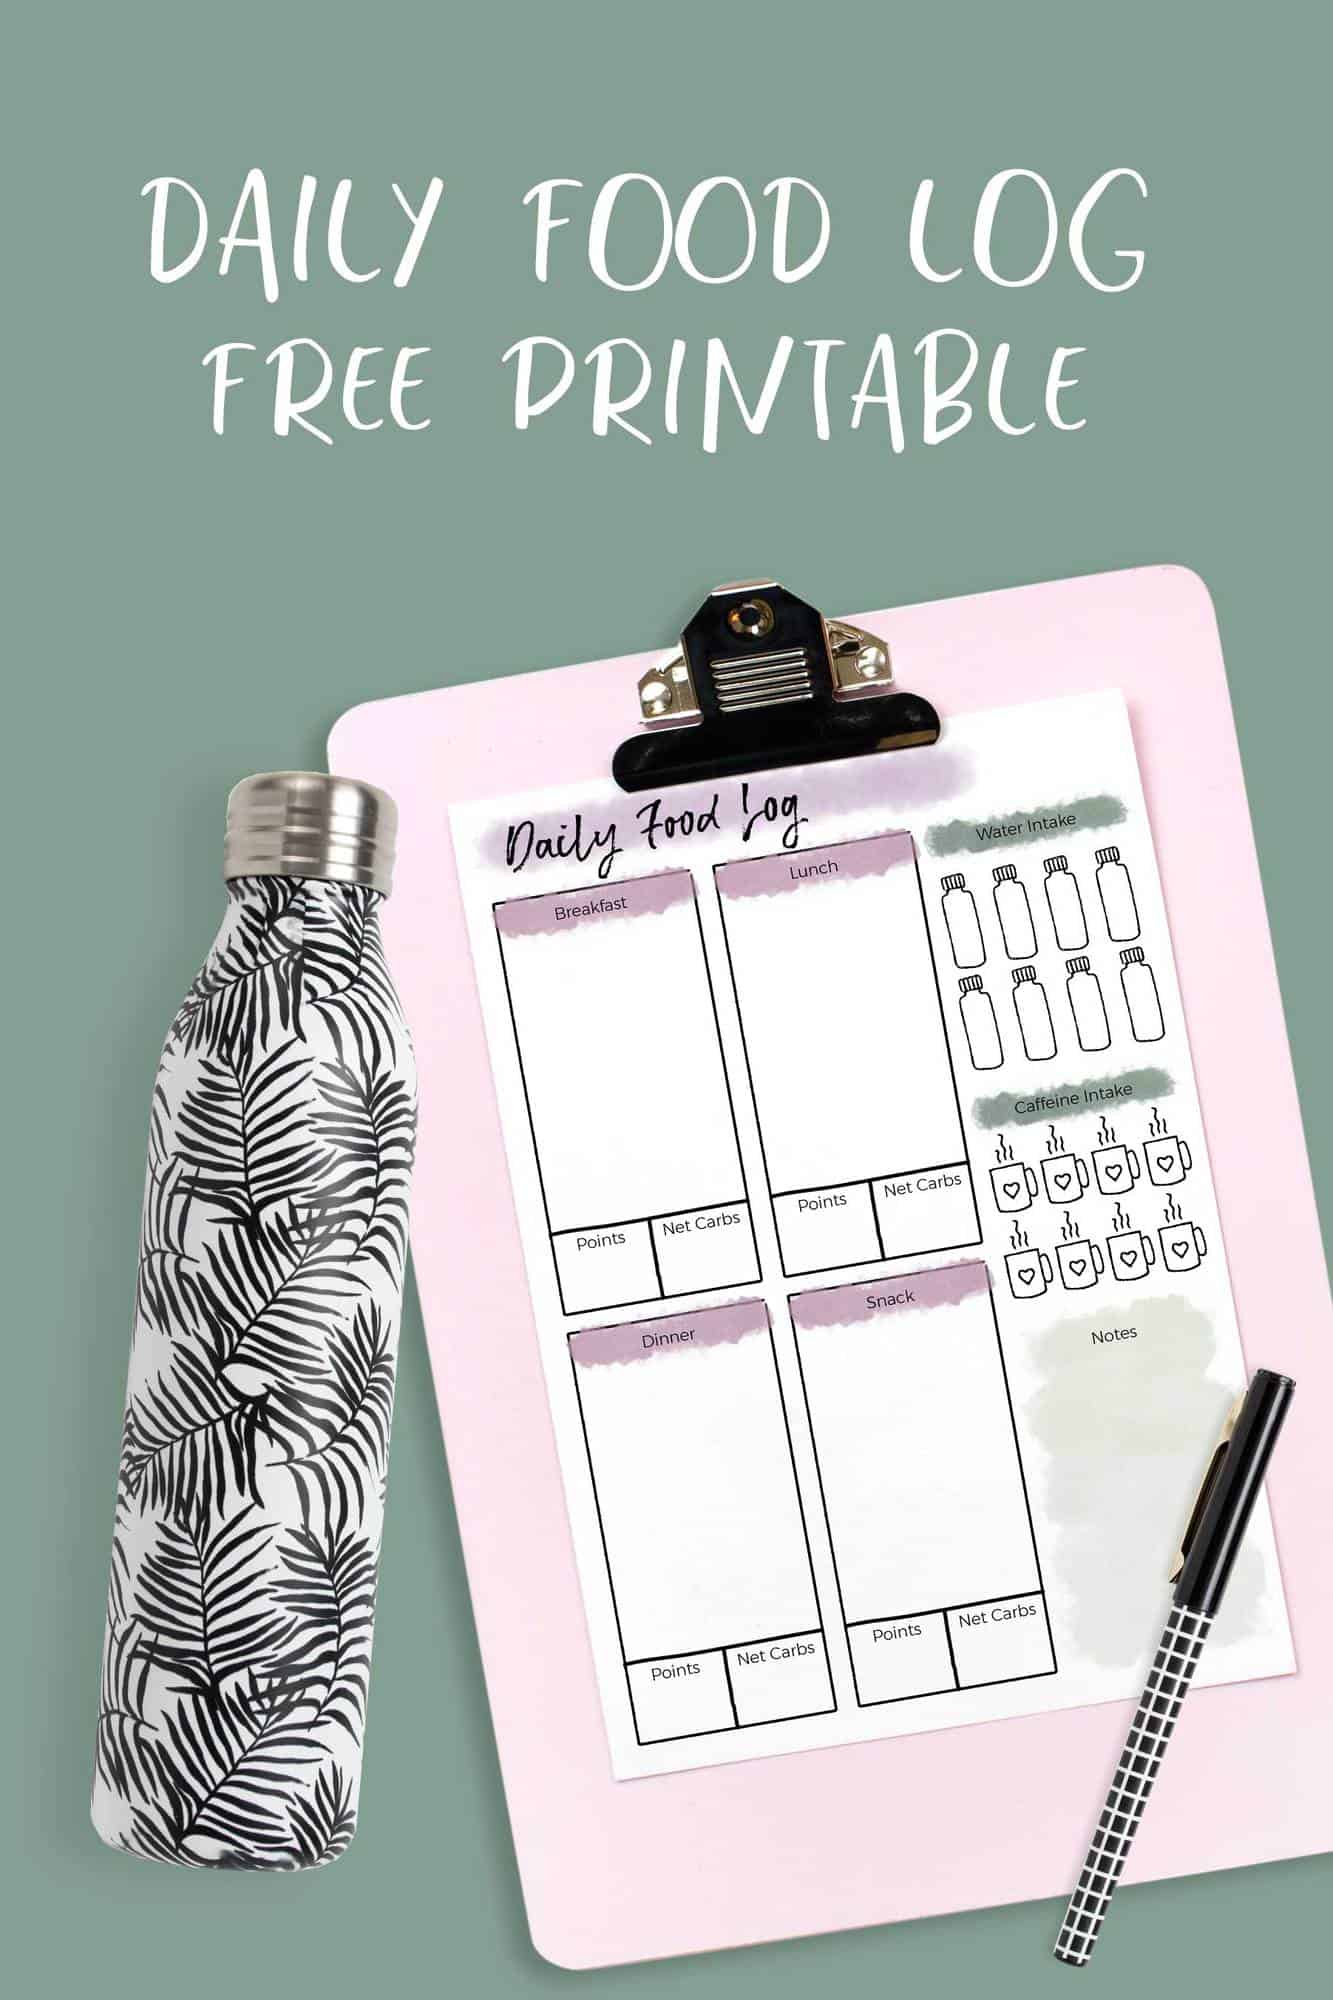 Download your free food log and water tracker printable and check out the cute ways to decorate your water bottle!